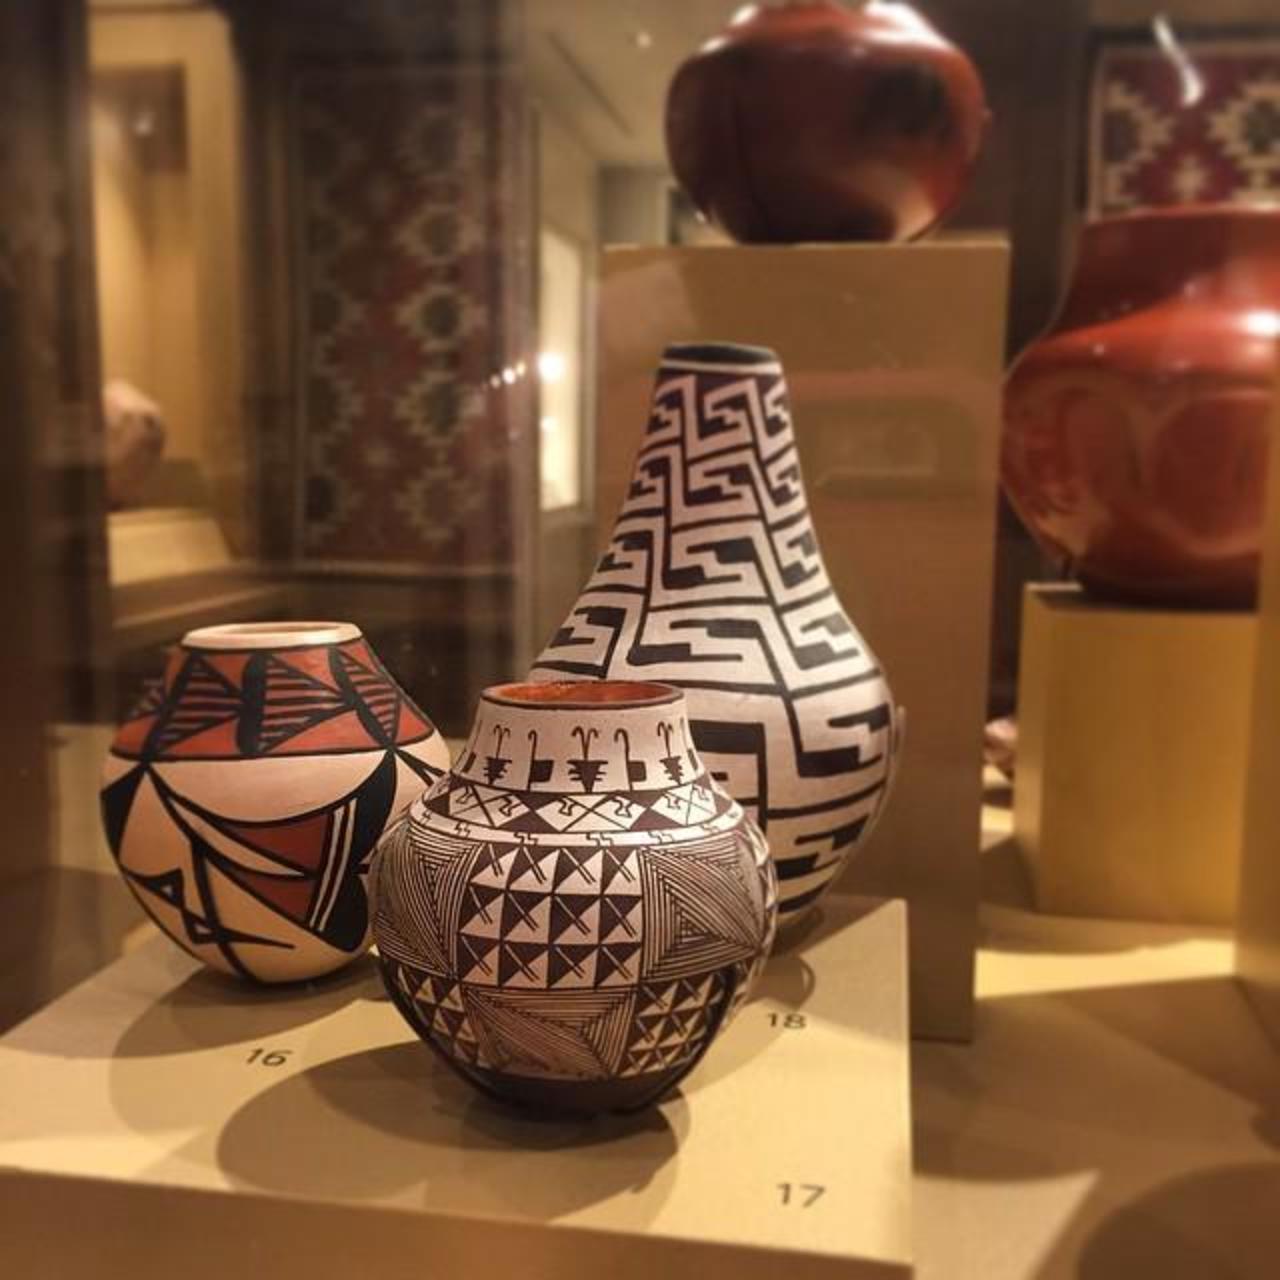 I'm obsessed with these #graphicprints on these #ceramics from the #Emory #museum! http://ift.tt/1MjwBXZ http://t.co/DpJJoiSml5